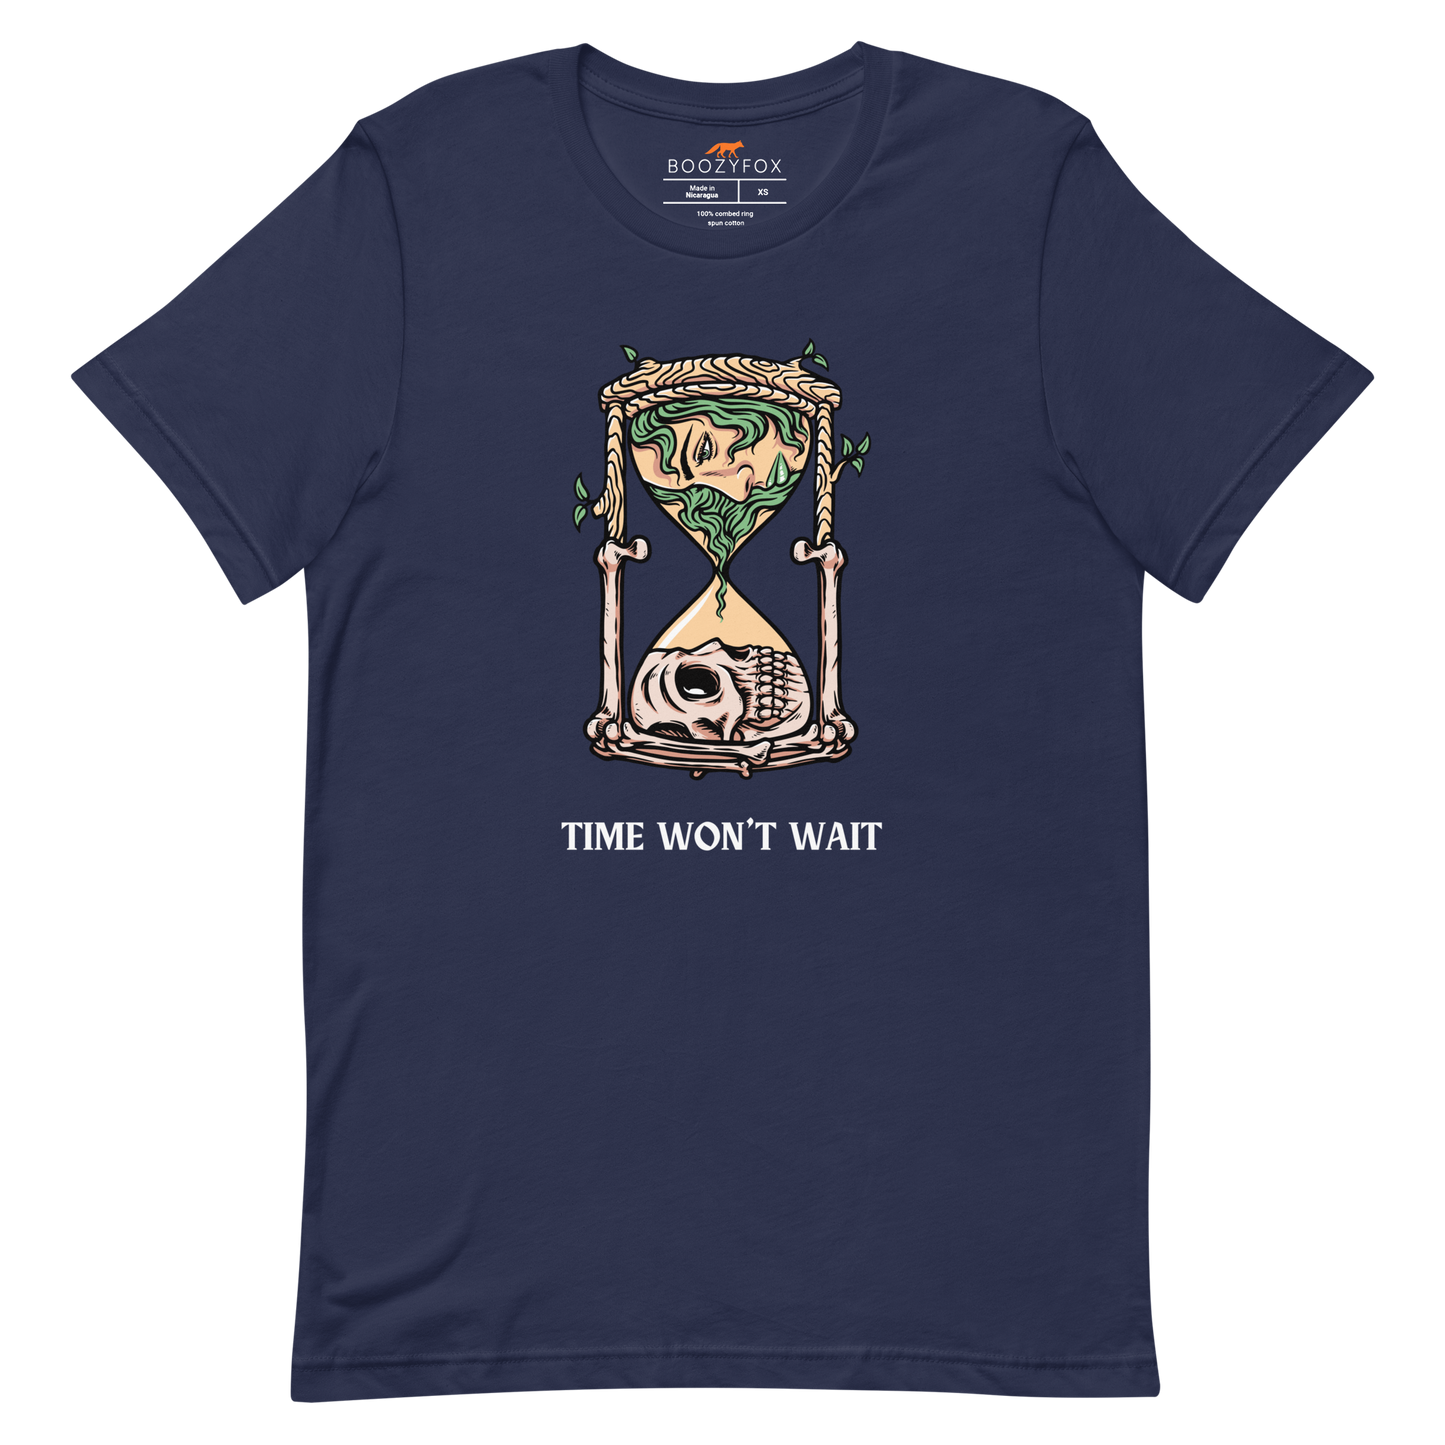 Navy Premium Hourglass Tee featuring a captivating Time Won't Wait graphic on the chest - Cool Graphic Hourglass Tees - Boozy Fox